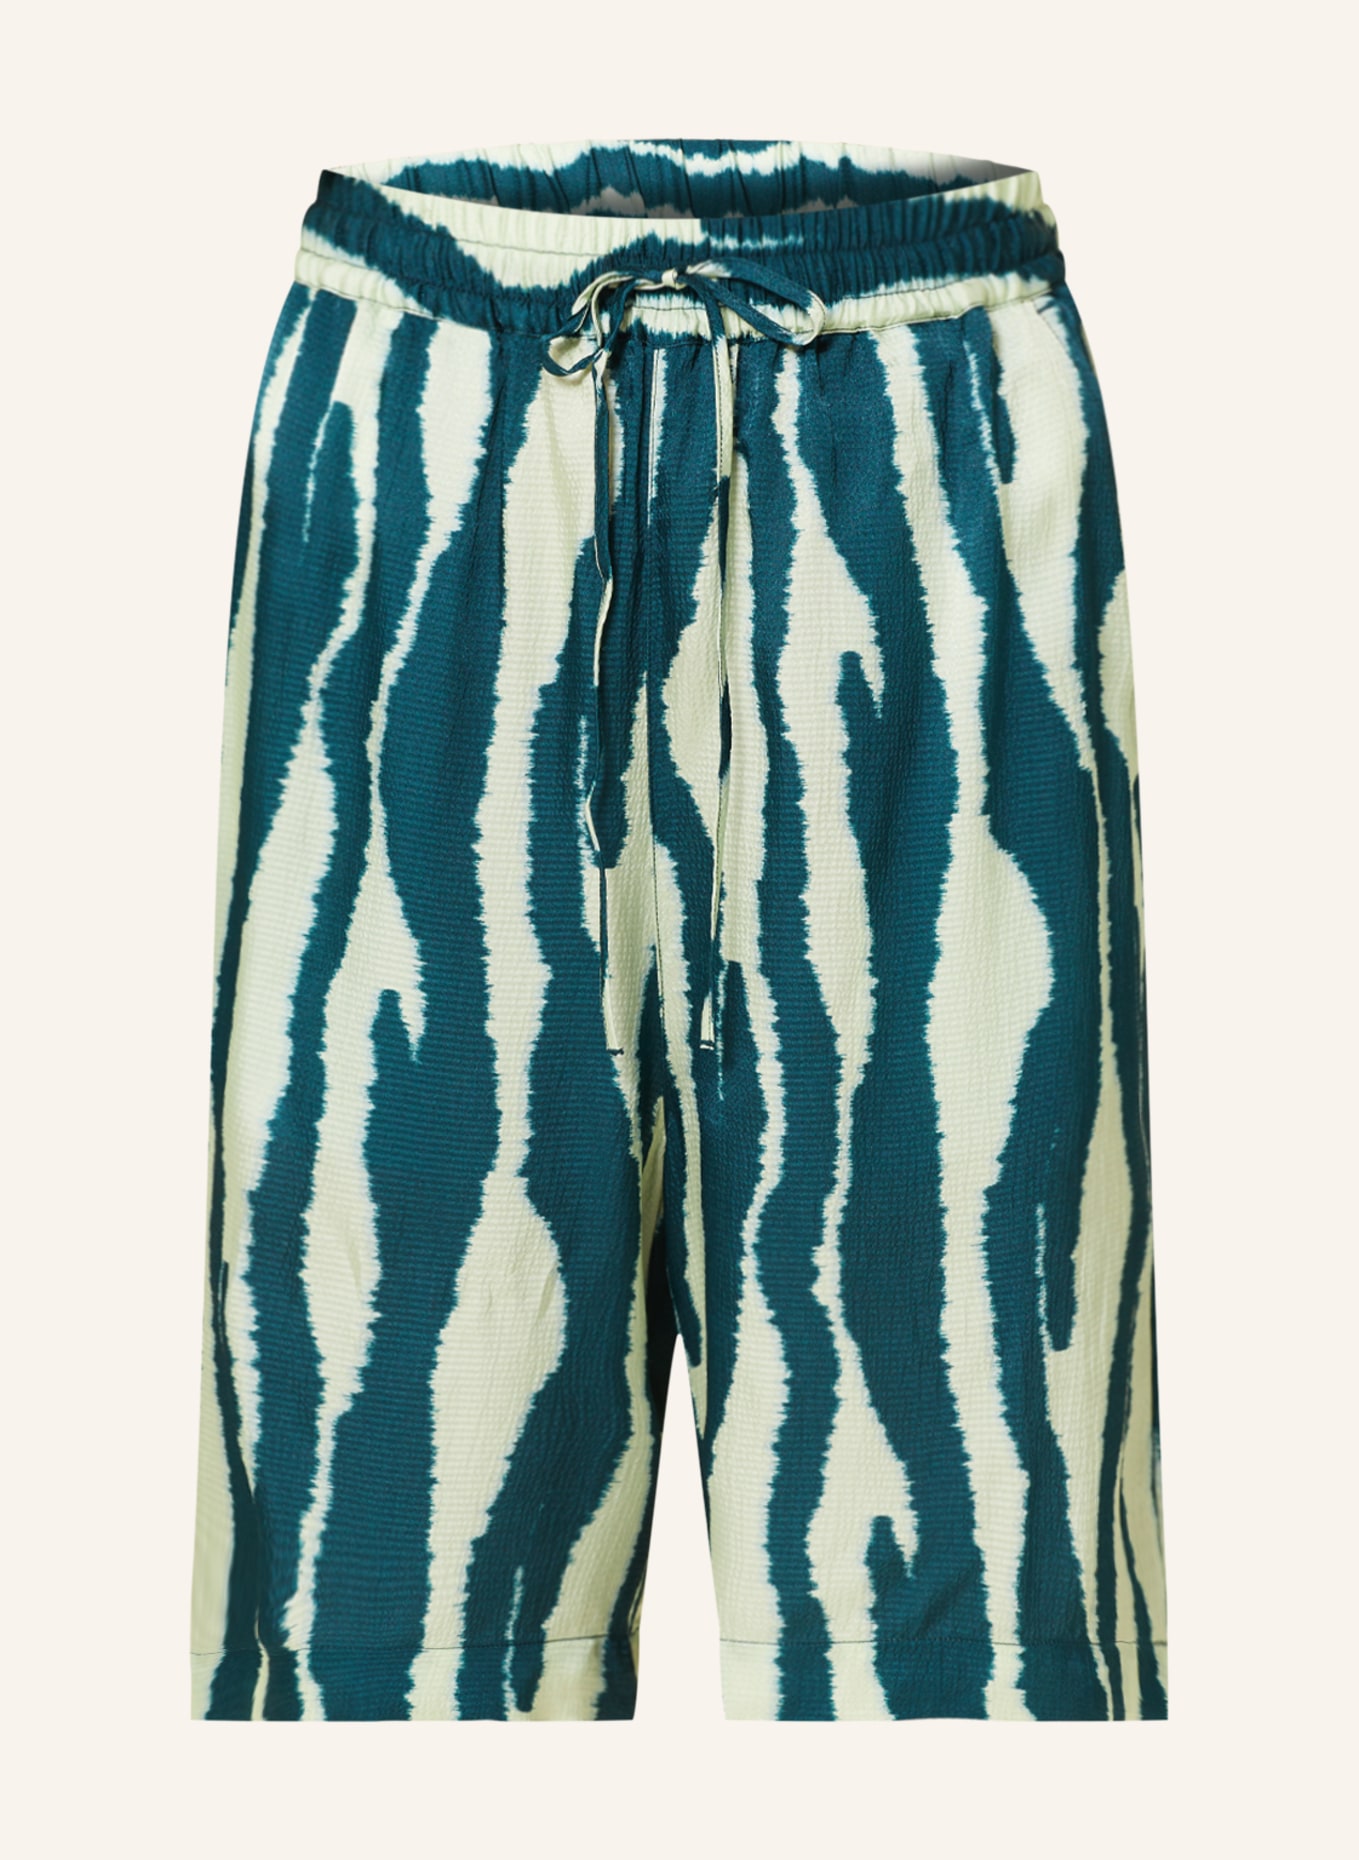 CLOSED Shorts, Color: TEAL/ LIGHT GREEN (Image 1)